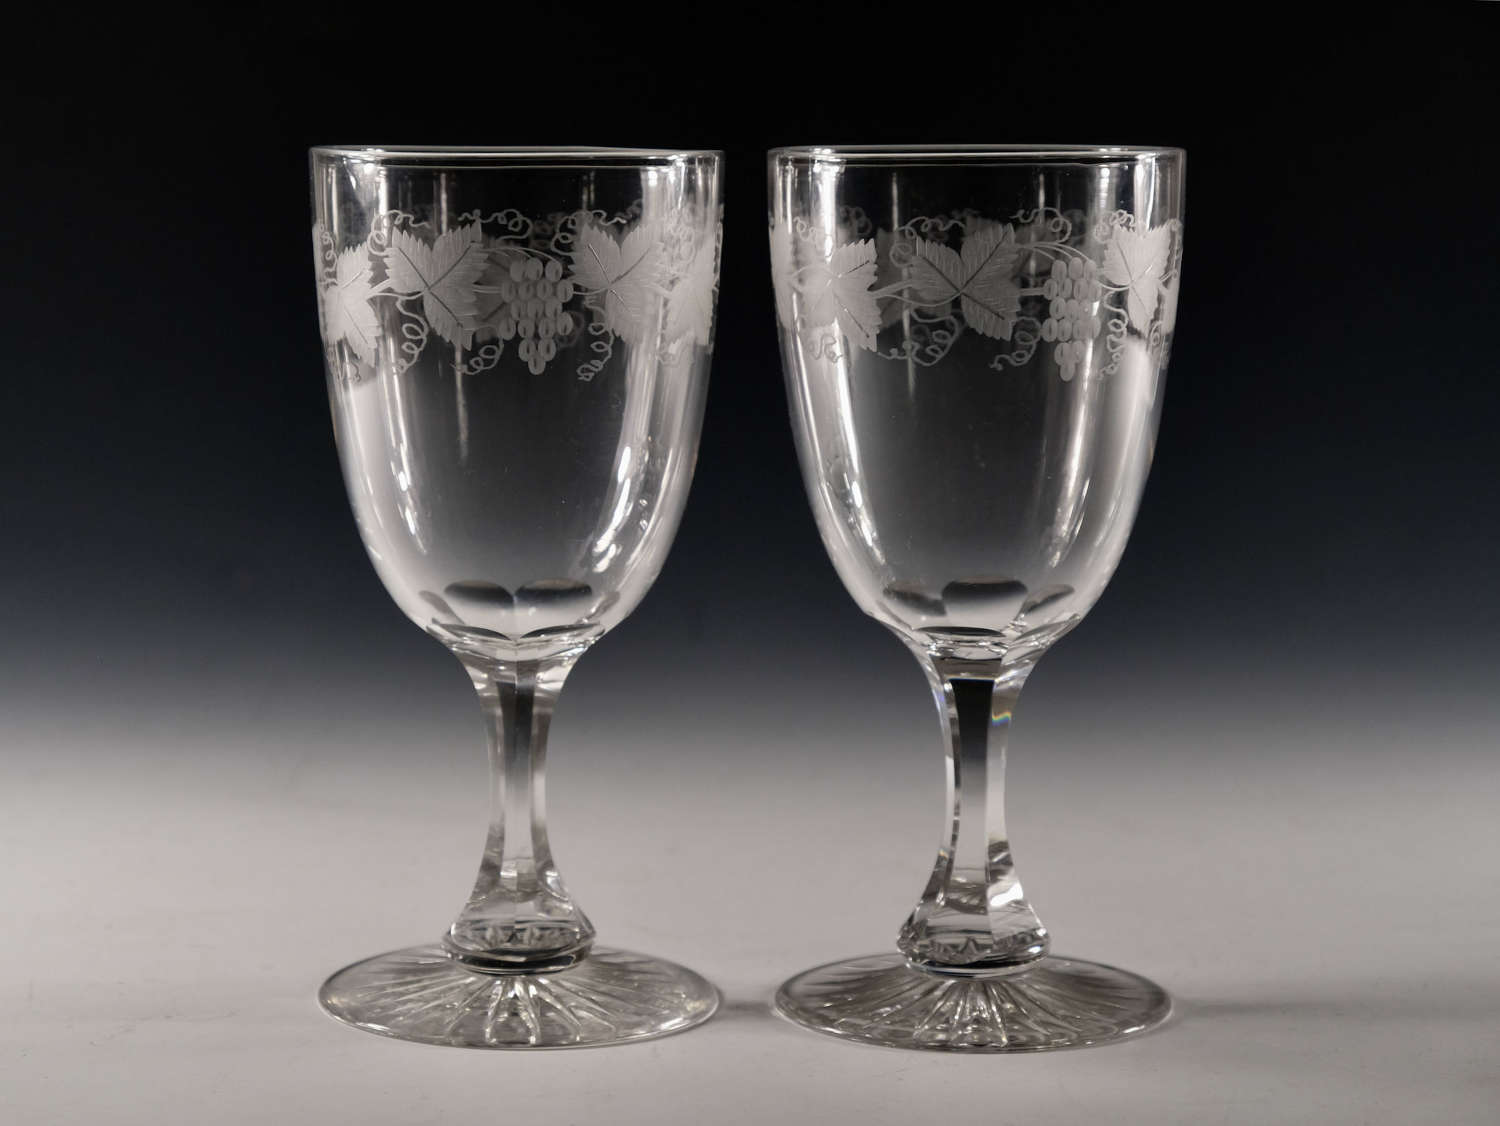 Antique glass - pair of goblets English c1880